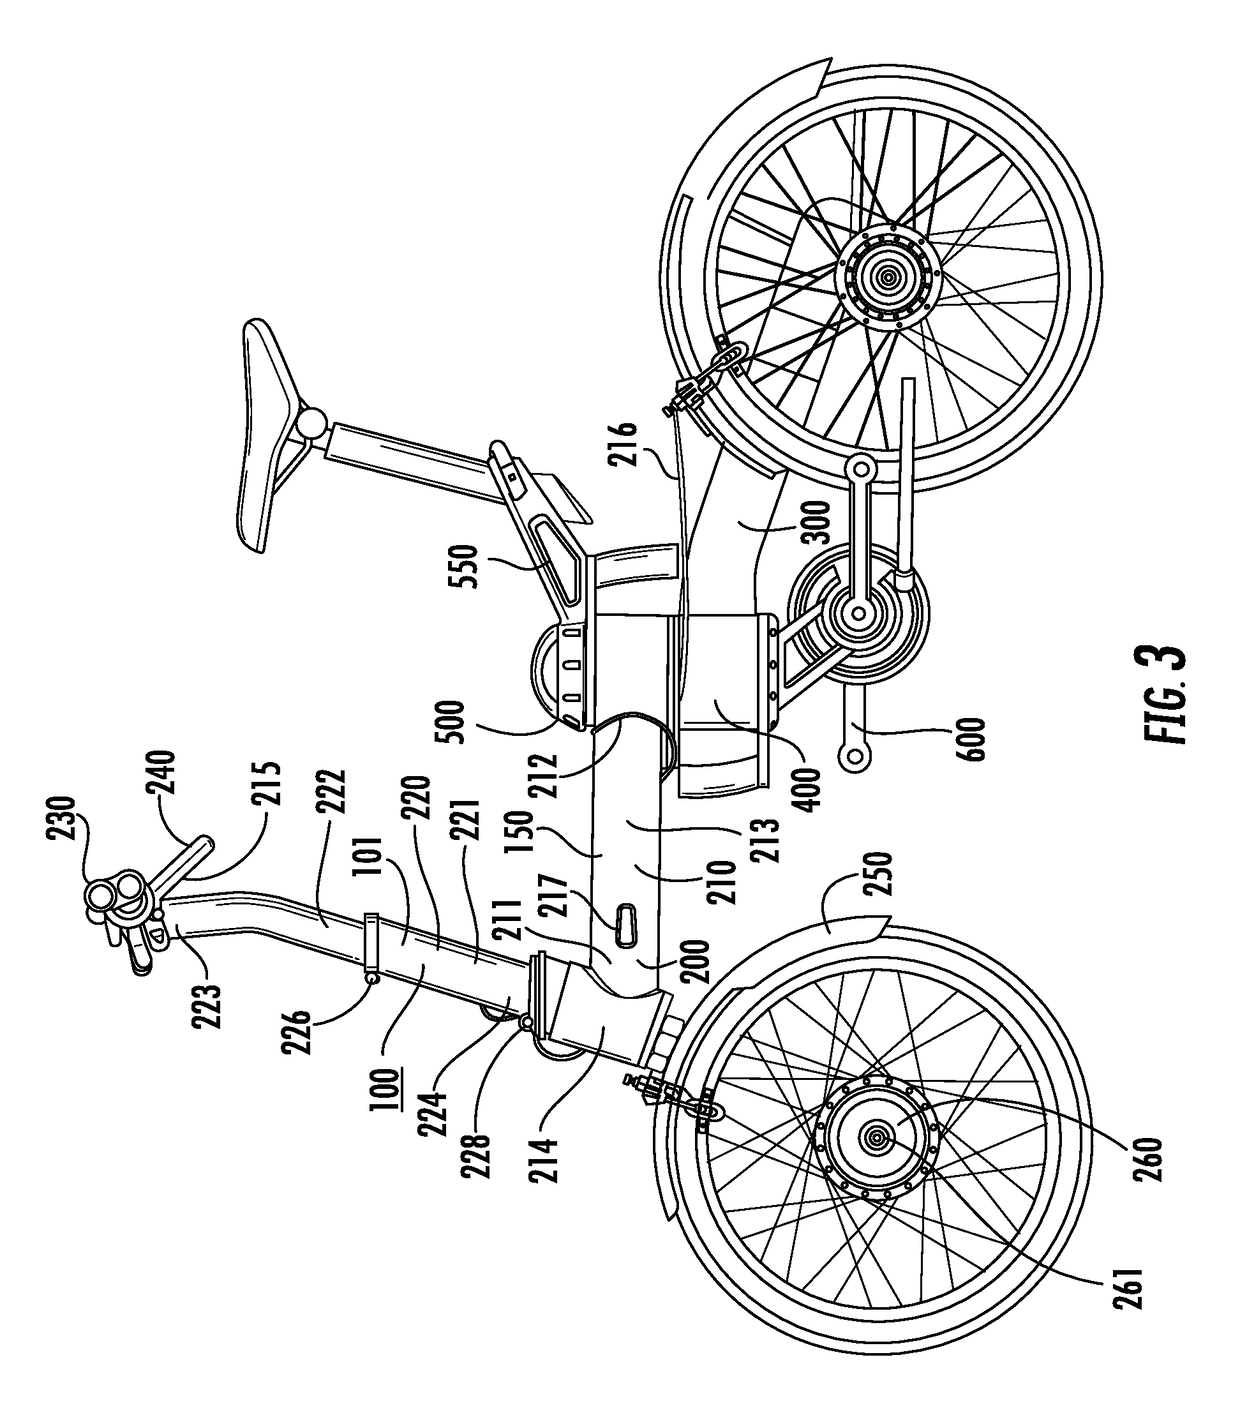 Folding bicycle with electric power train assist